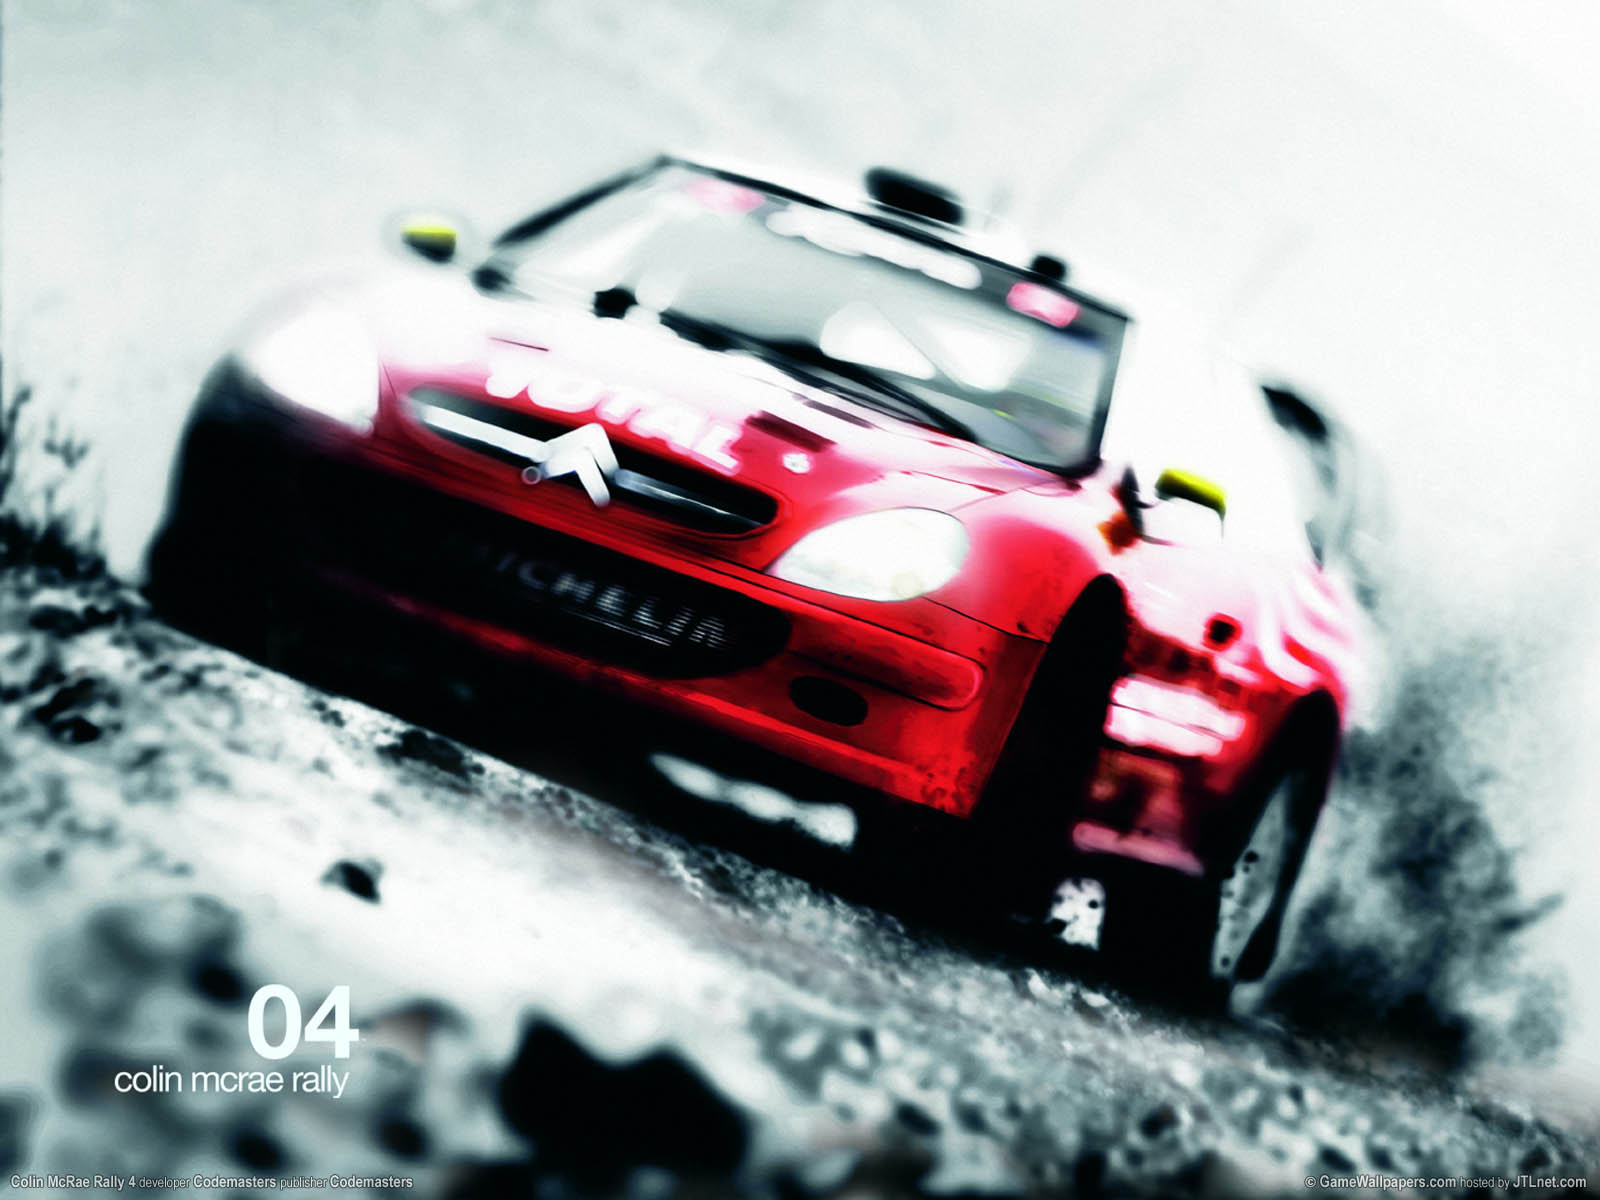 Colin McRae Rally 4 achtergrond 01 1600x1200